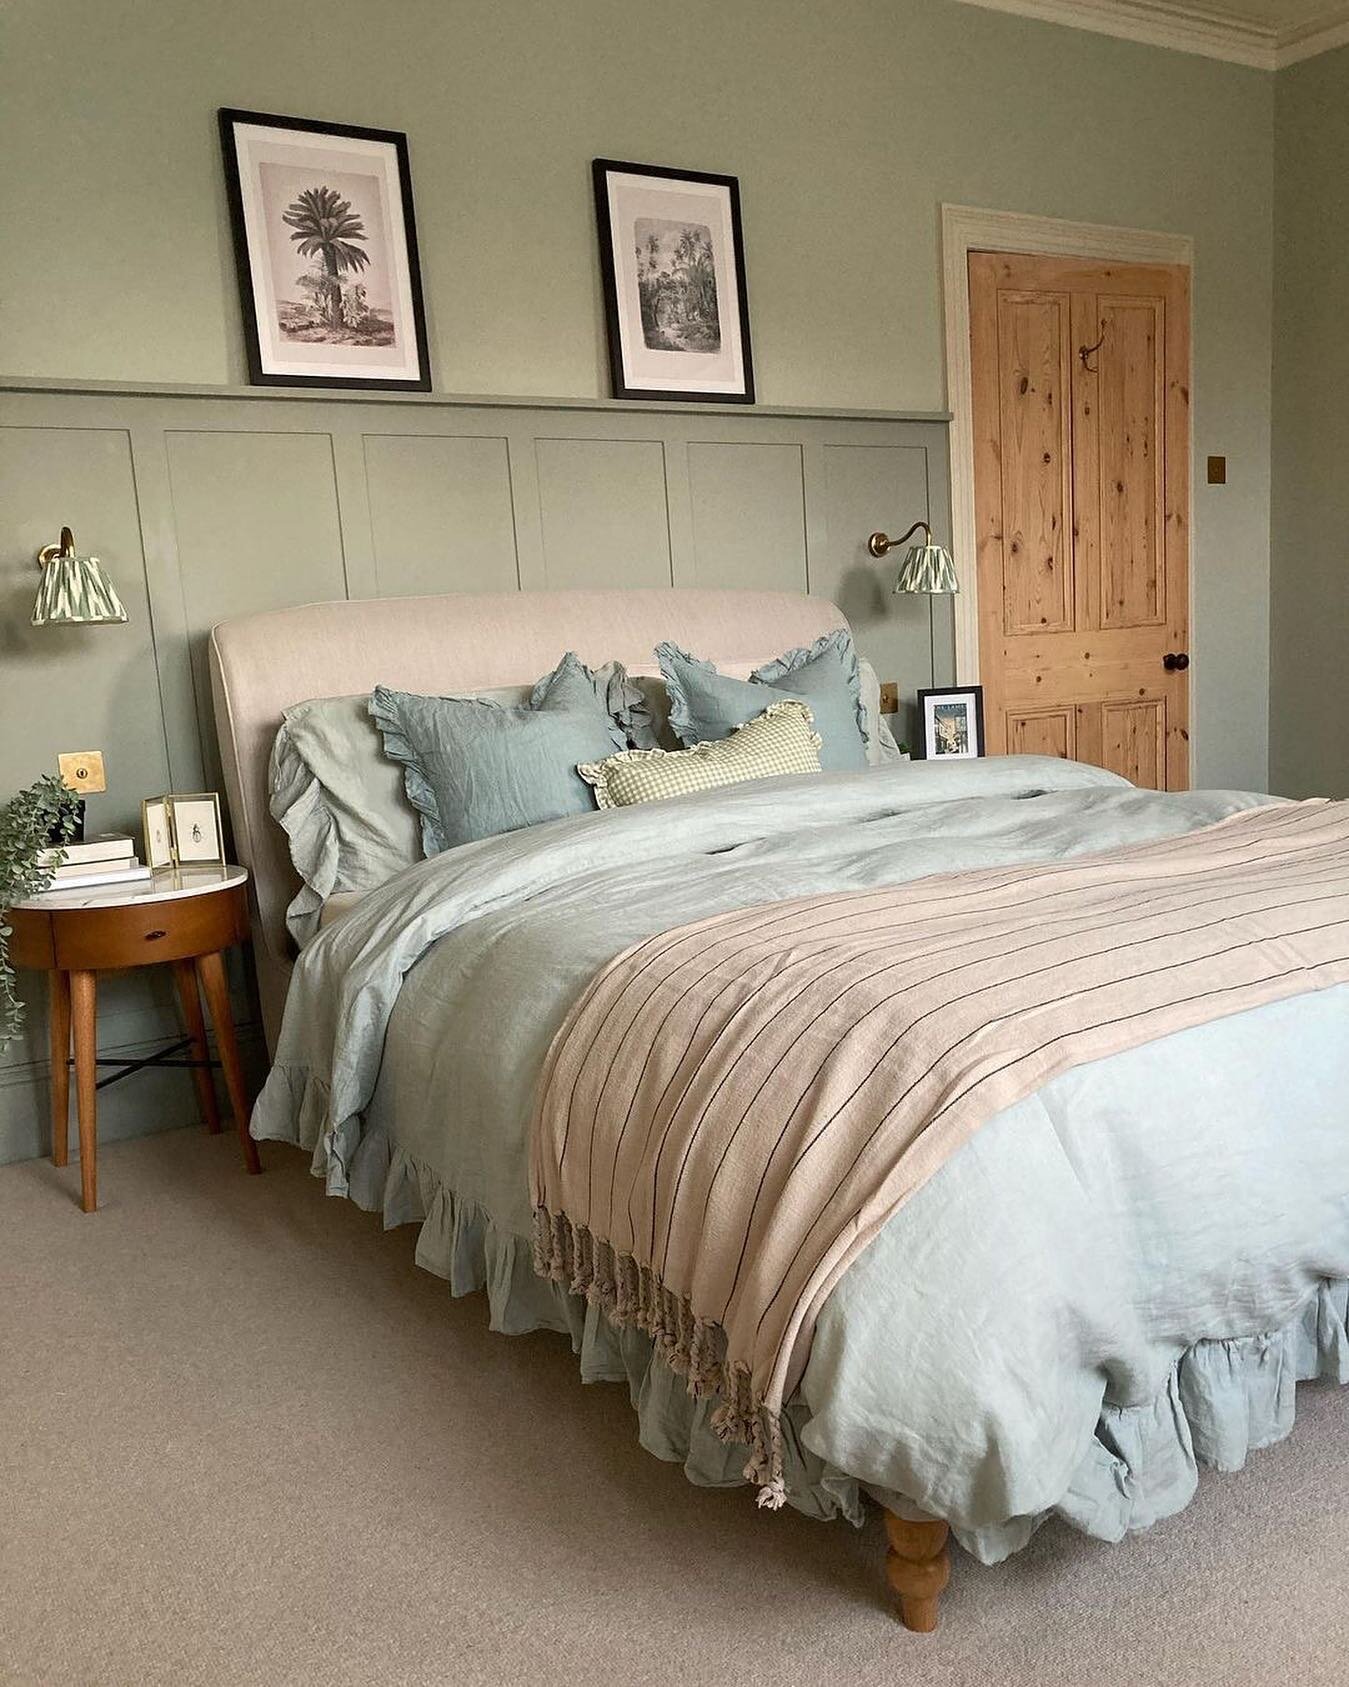 Who else is looking forward to sleeping in on Sunday morning?
⁣⁣
If your bedroom looks as dreamy as this, it&rsquo;s easy to see how you won&rsquo;t be able to resist.
⁣⁣⁣
Here is the master bedroom in the home of one of our favourite interiors accou